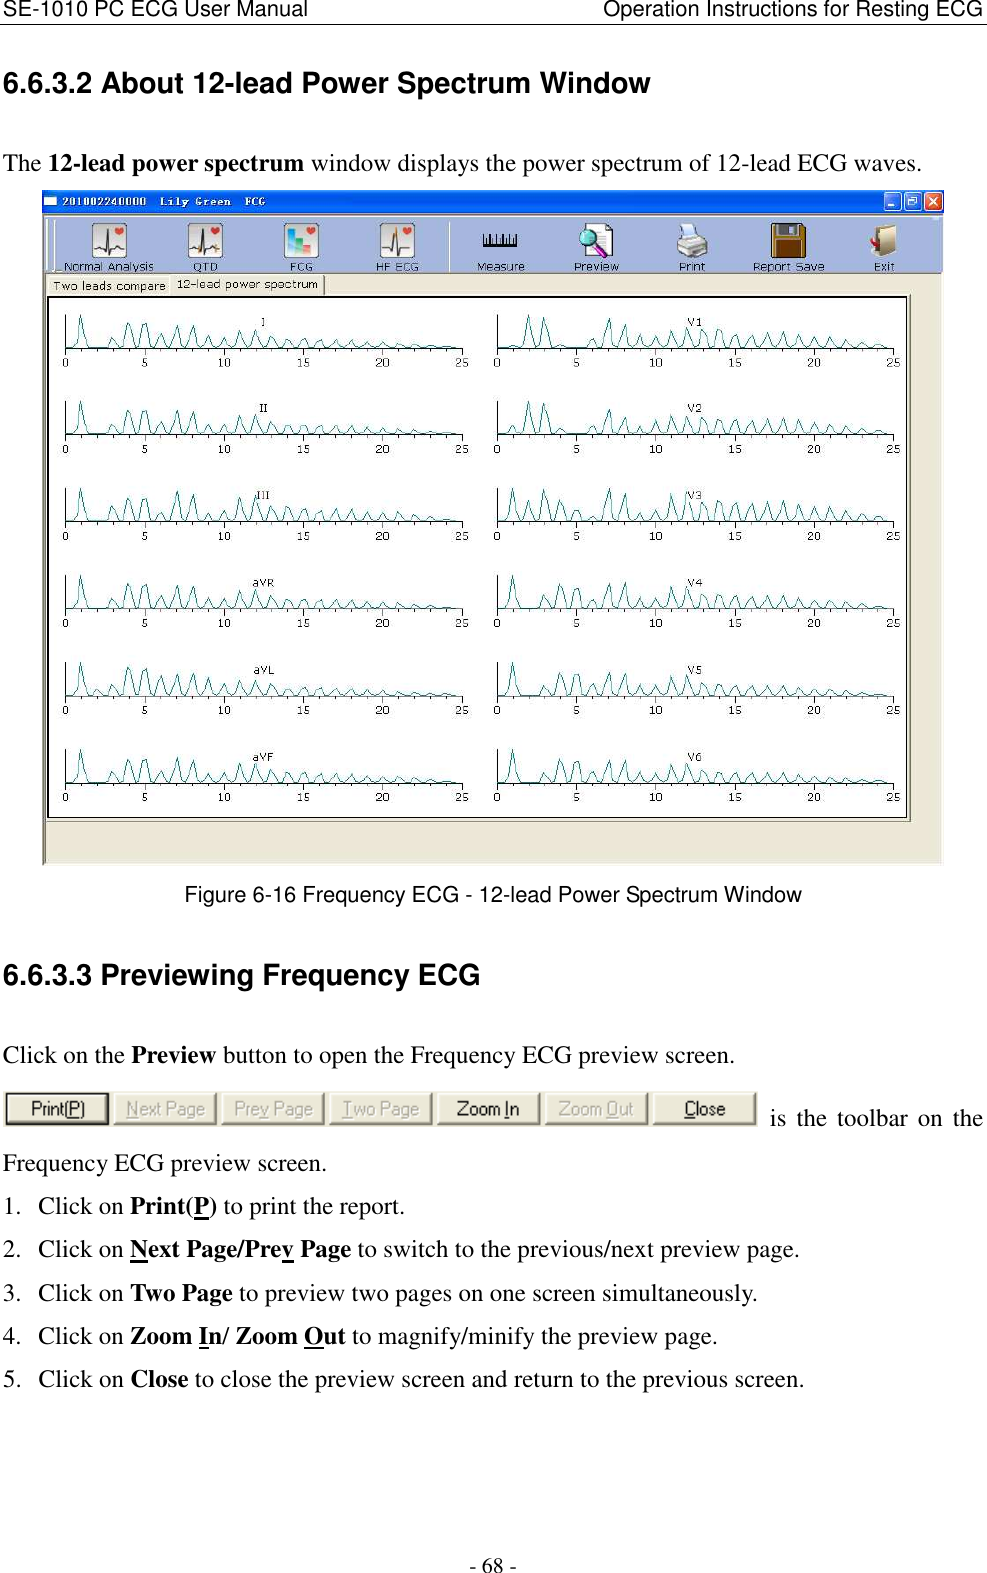 SE-1010 PC ECG User Manual                                                      Operation Instructions for Resting ECG - 68 - 6.6.3.2 About 12-lead Power Spectrum Window The 12-lead power spectrum window displays the power spectrum of 12-lead ECG waves.  Figure 6-16 Frequency ECG - 12-lead Power Spectrum Window 6.6.3.3 Previewing Frequency ECG Click on the Preview button to open the Frequency ECG preview screen.   is  the  toolbar  on  the Frequency ECG preview screen. 1. Click on Print(P) to print the report. 2. Click on Next Page/Prev Page to switch to the previous/next preview page. 3. Click on Two Page to preview two pages on one screen simultaneously. 4. Click on Zoom In/ Zoom Out to magnify/minify the preview page. 5. Click on Close to close the preview screen and return to the previous screen. 